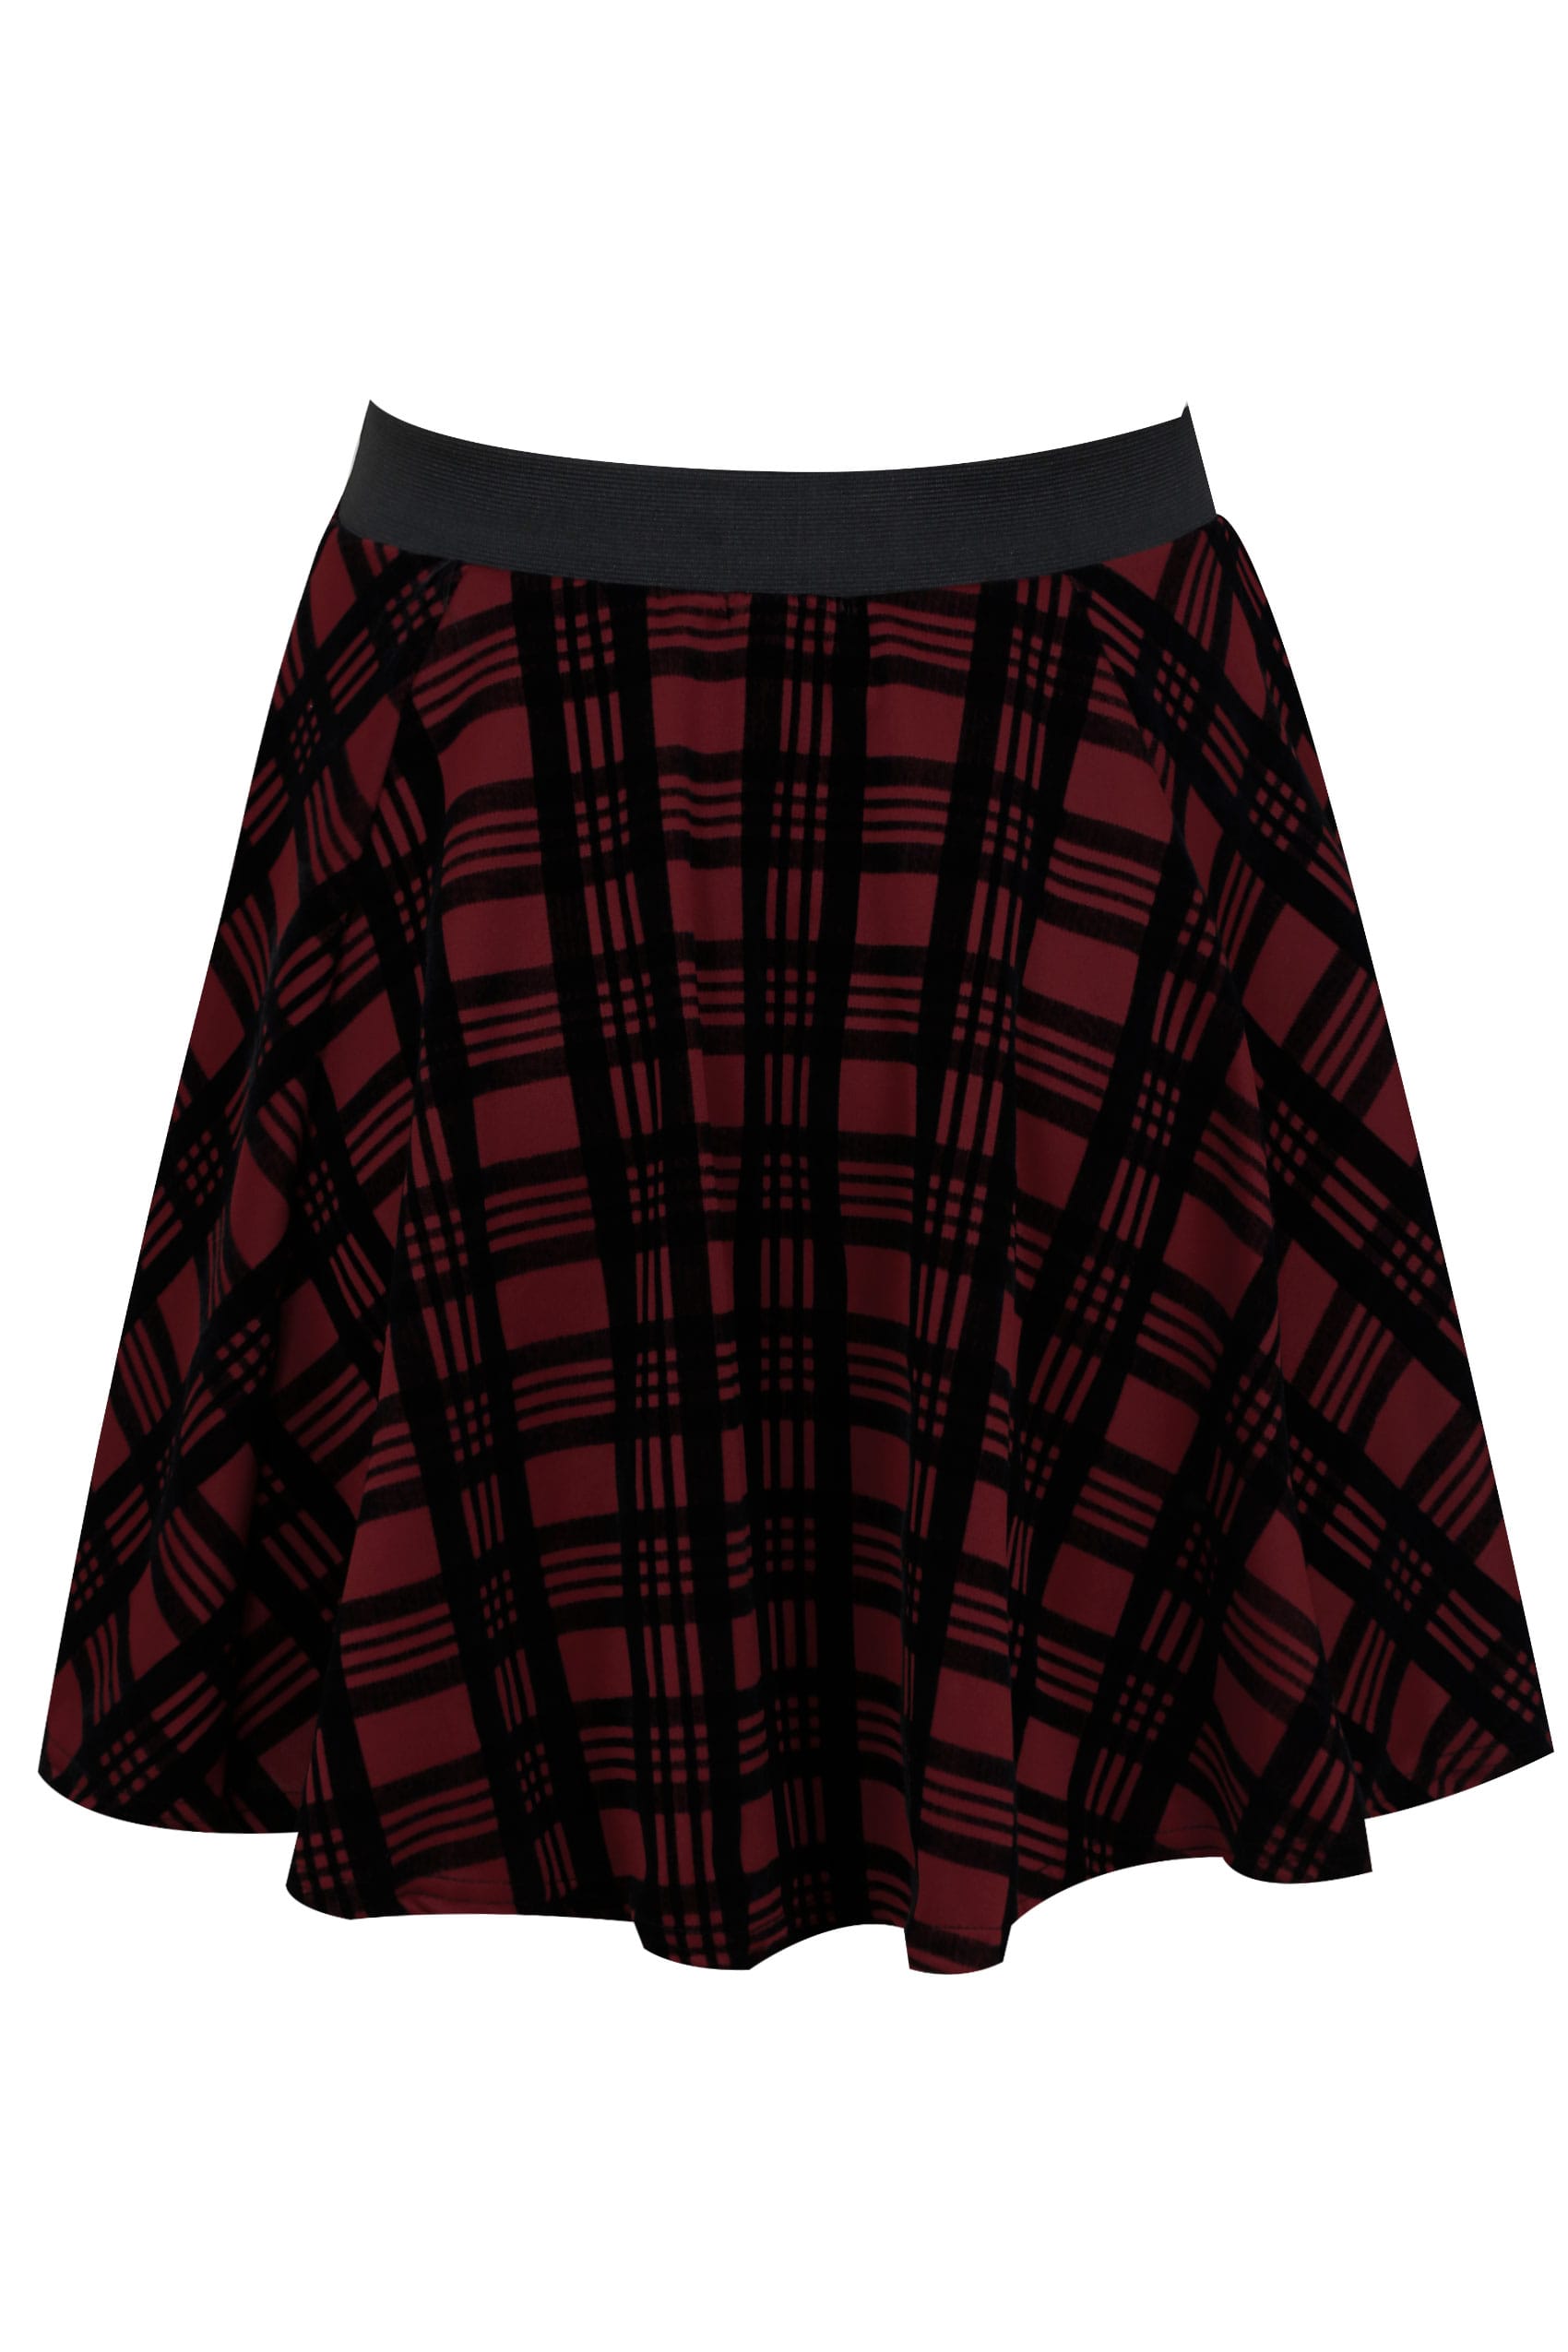 LIMITED COLLECTION Dark  Red  Checked Mini Skater Skirt  